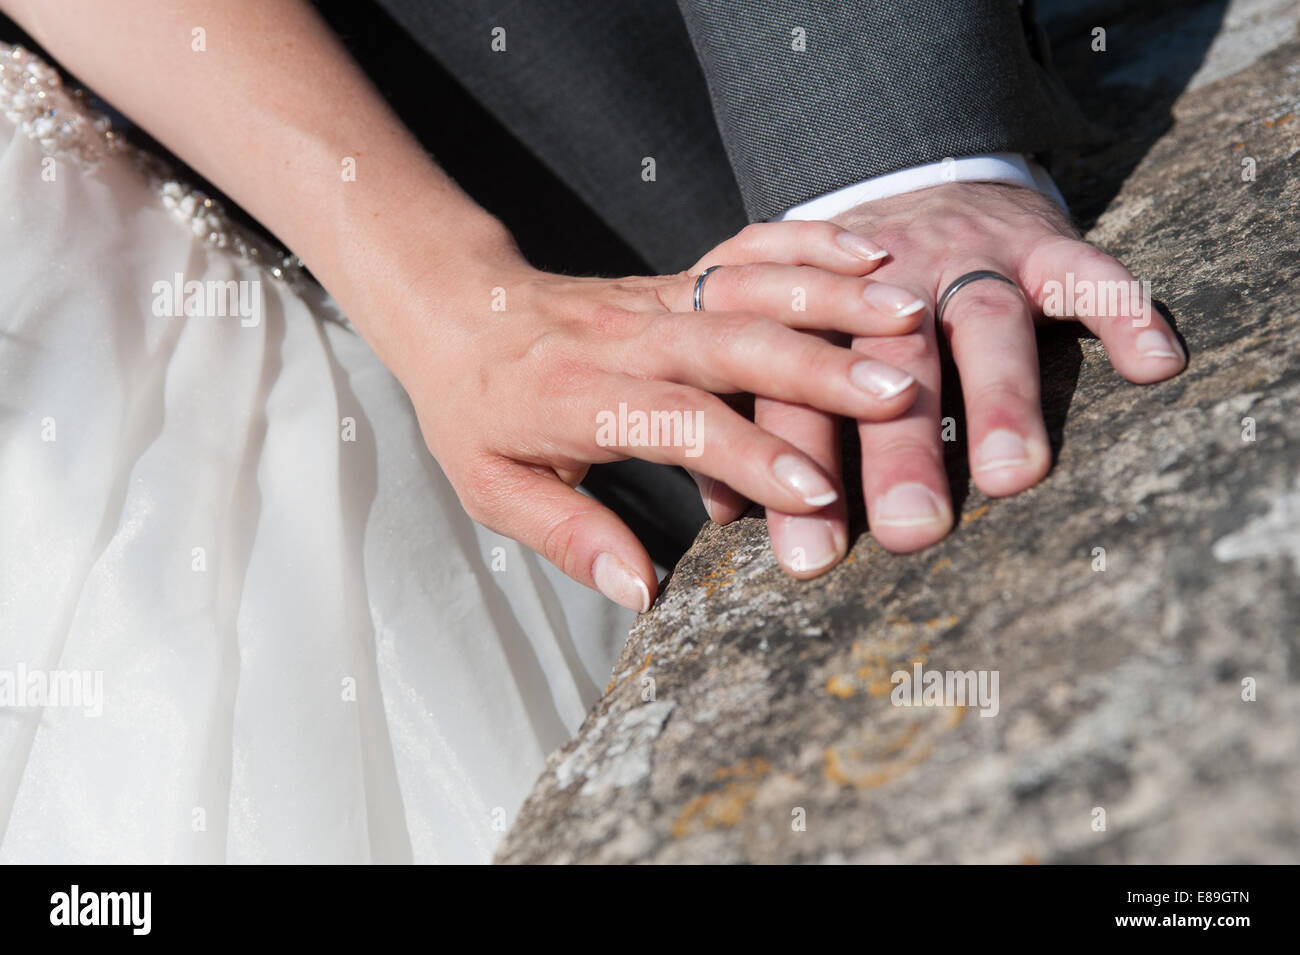 A newlywed bride lovingly touching the hand of her new husband Stock Photo